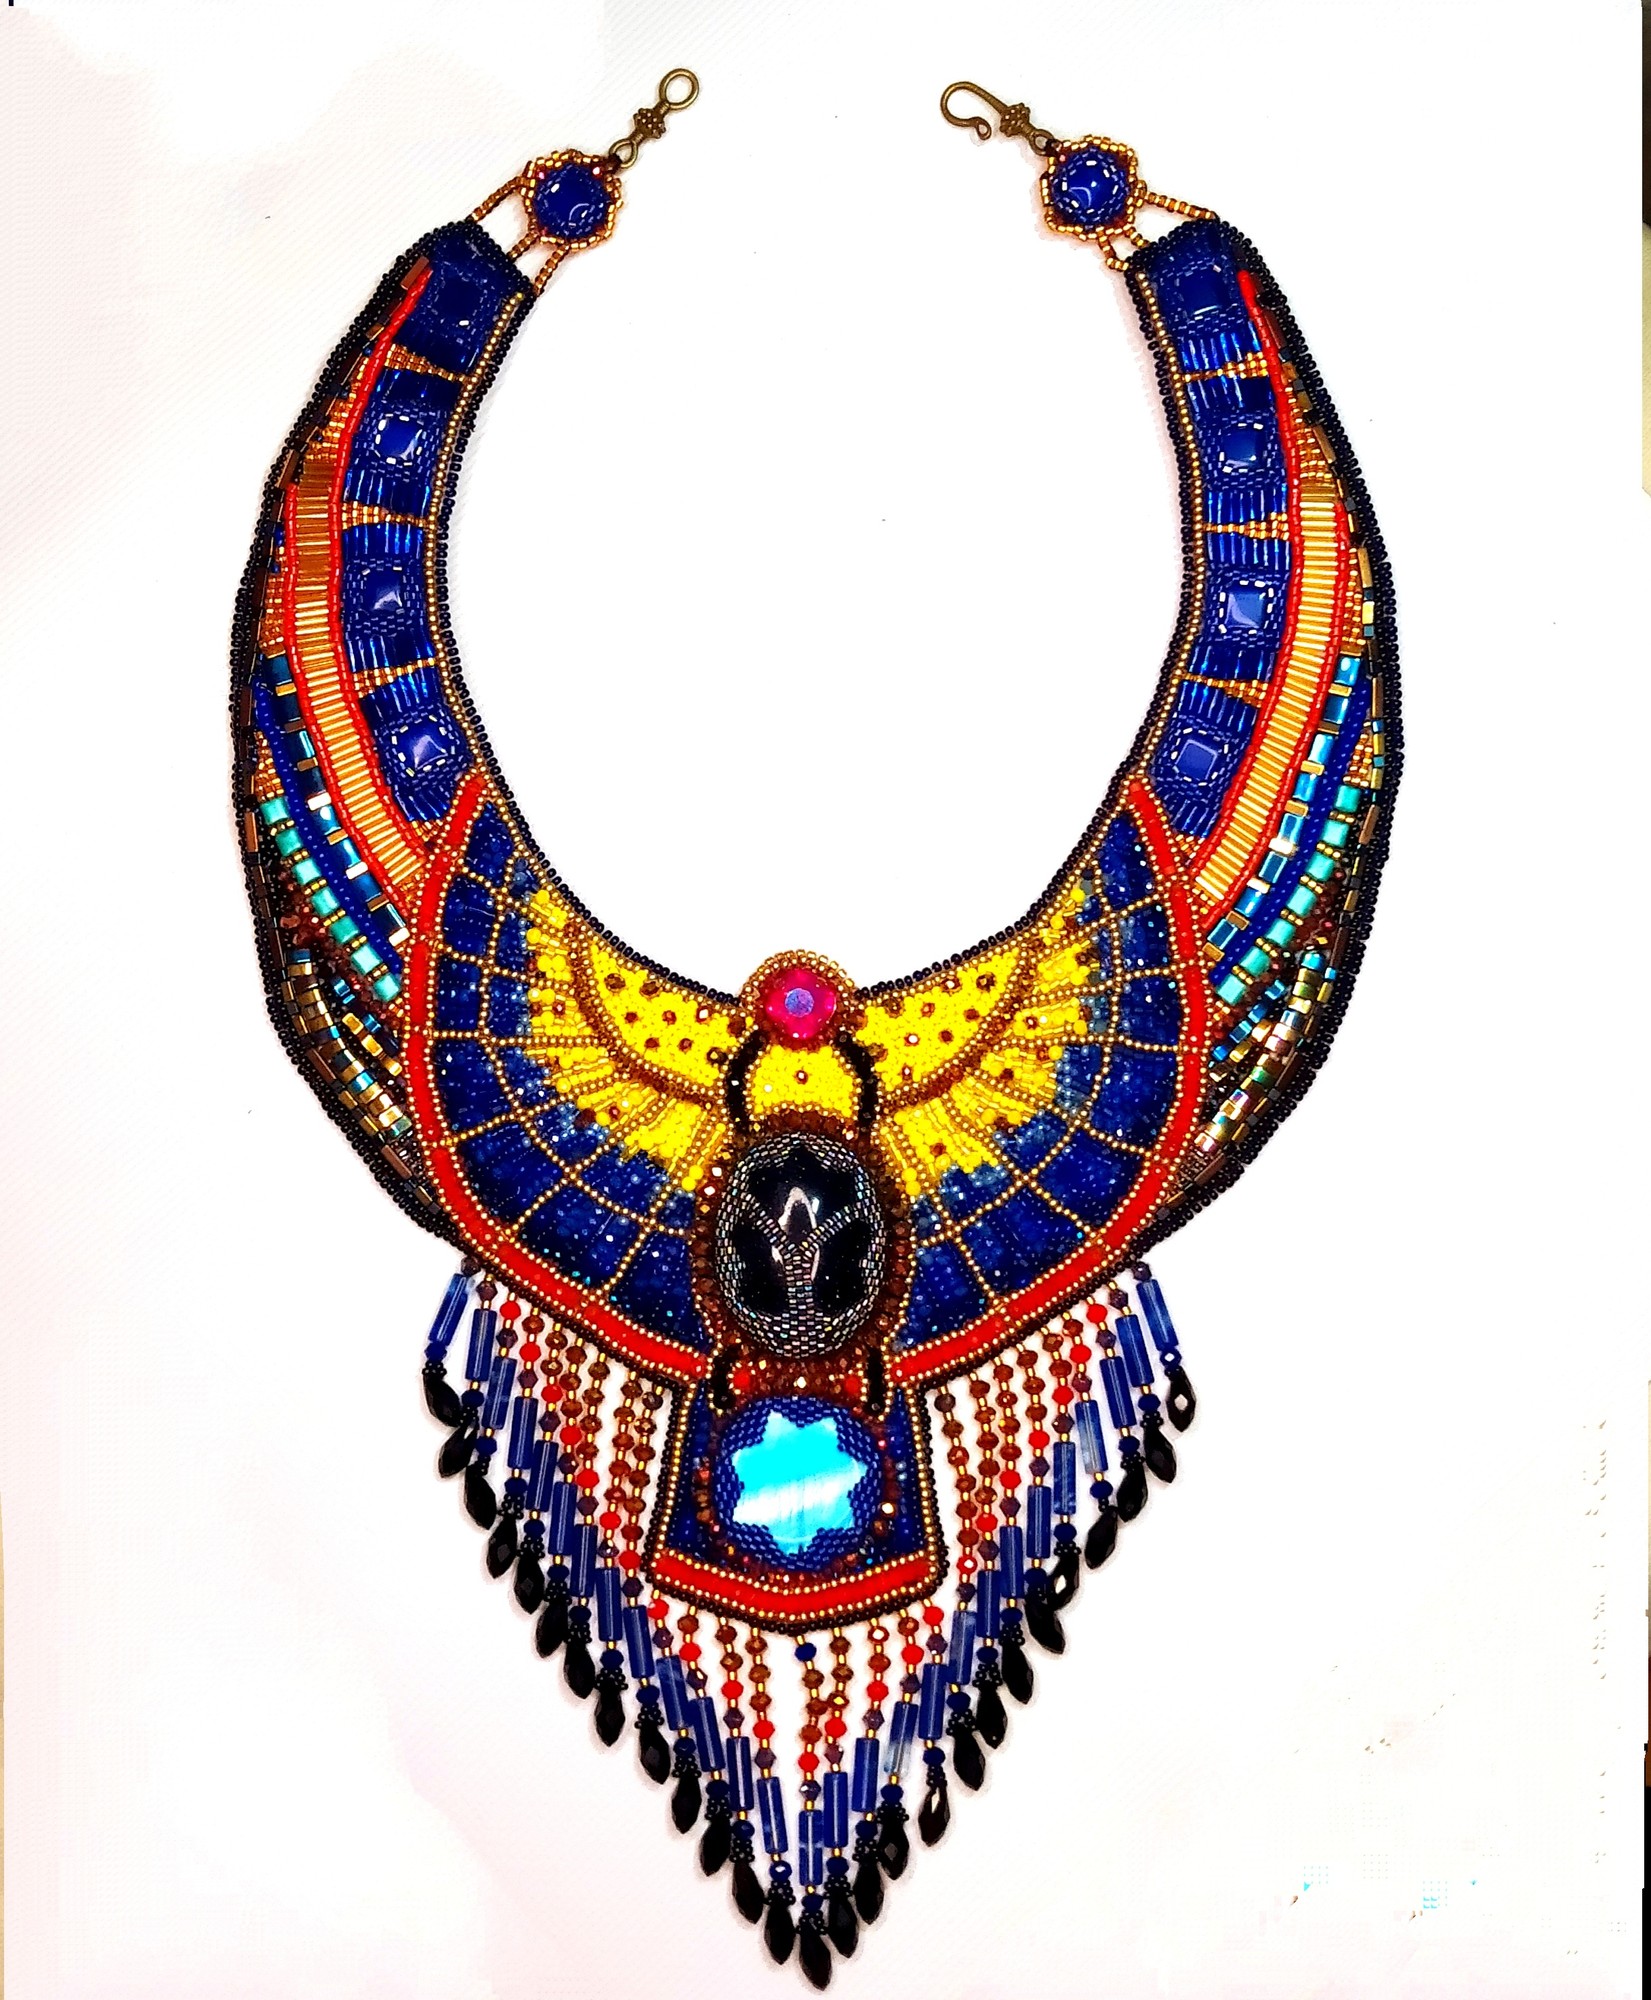 Necklace "egyptian power"